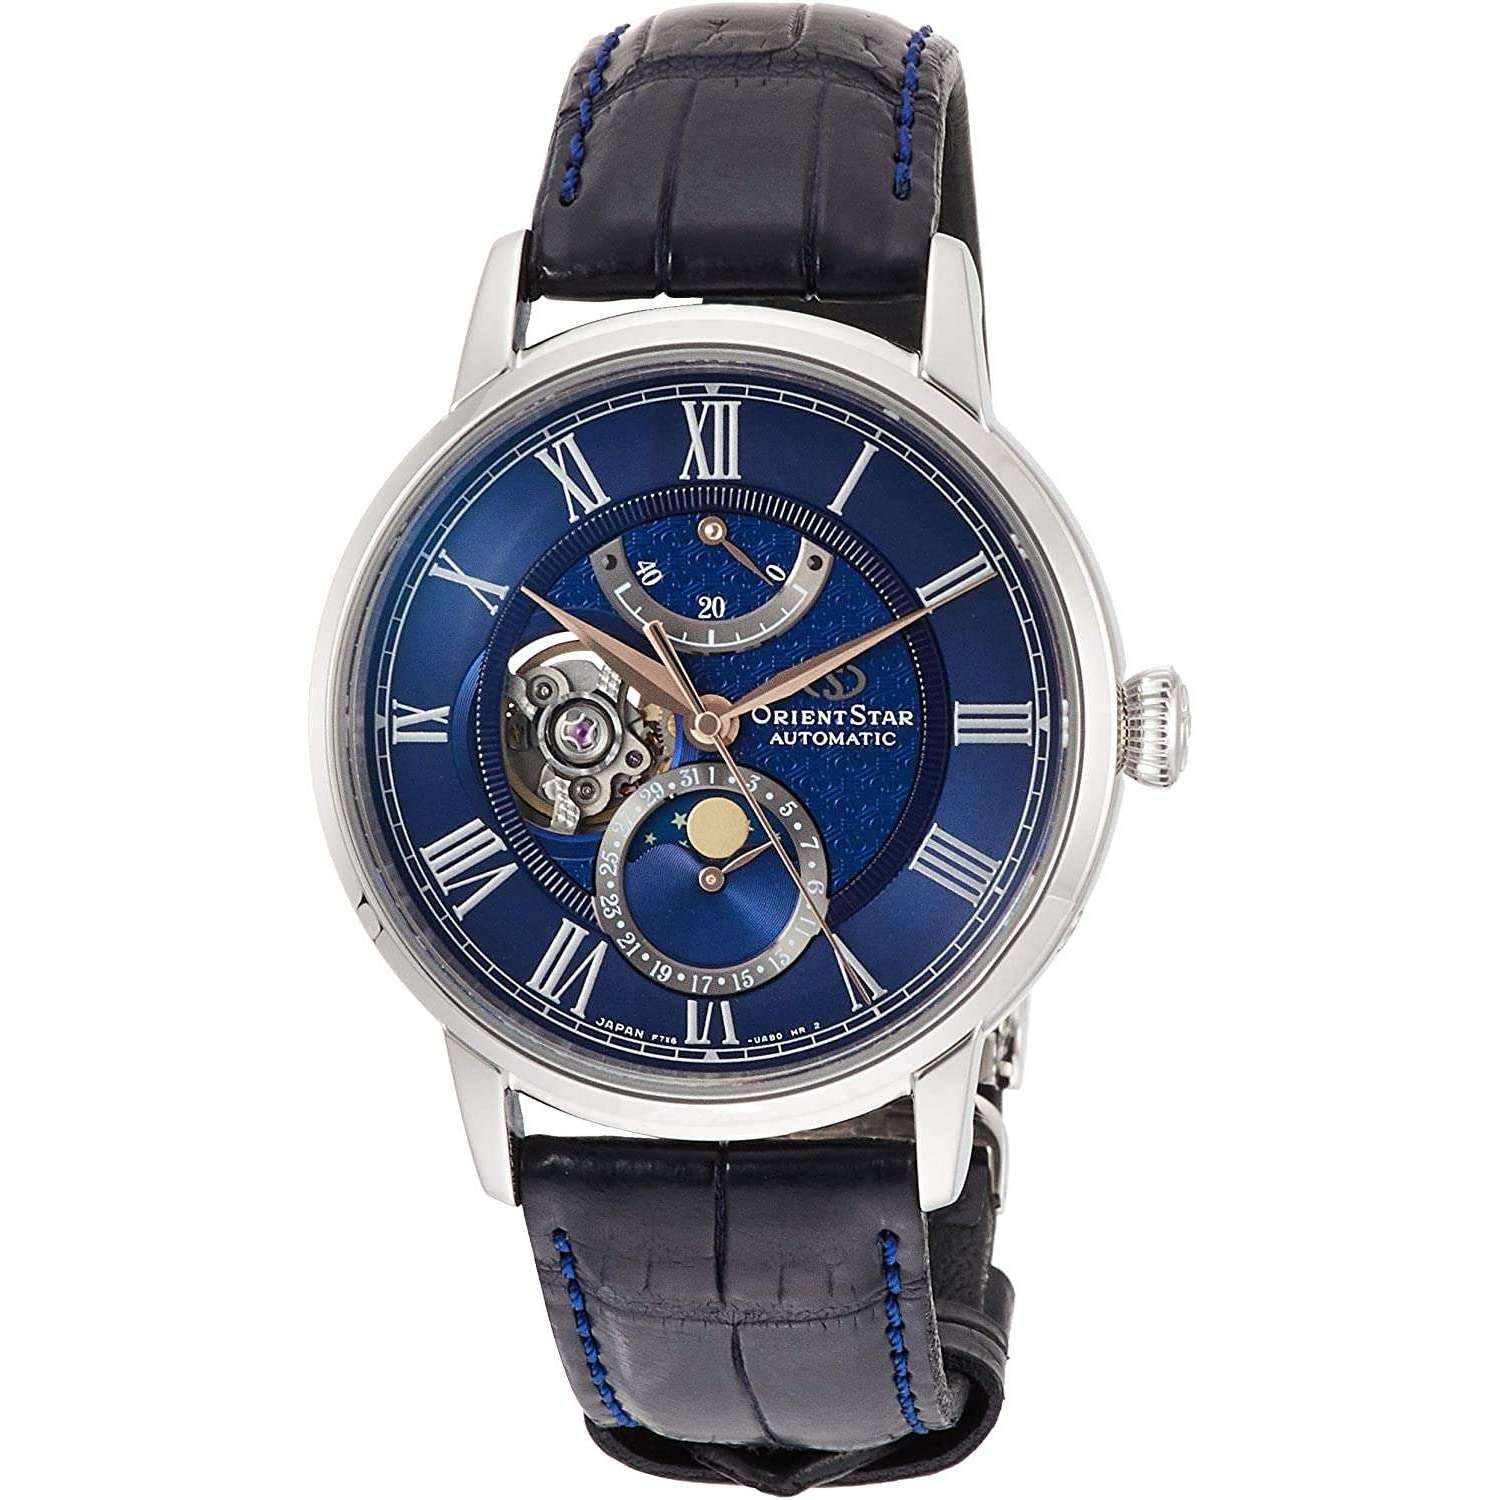 ORIENT STAR CLASSIC COLLECTION MECHANICAL MOON PHASE MEN WATCH (500 LIMITED) RK-AM0006L - ROOK JAPAN